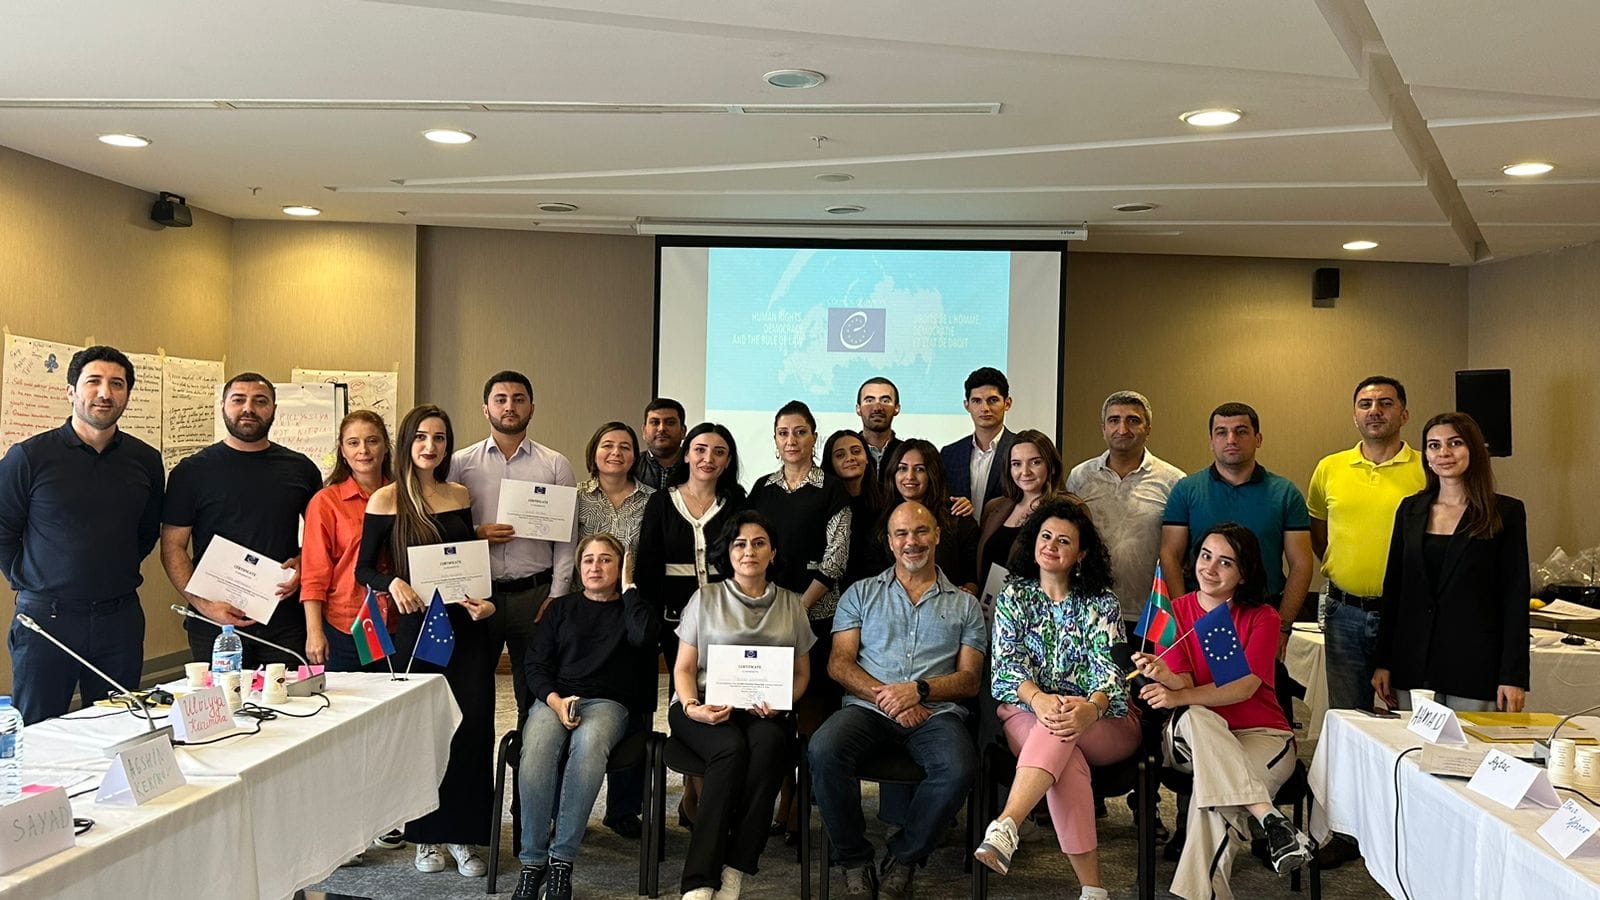 Training workshop on “Conflict Sensitive Reporting” completed